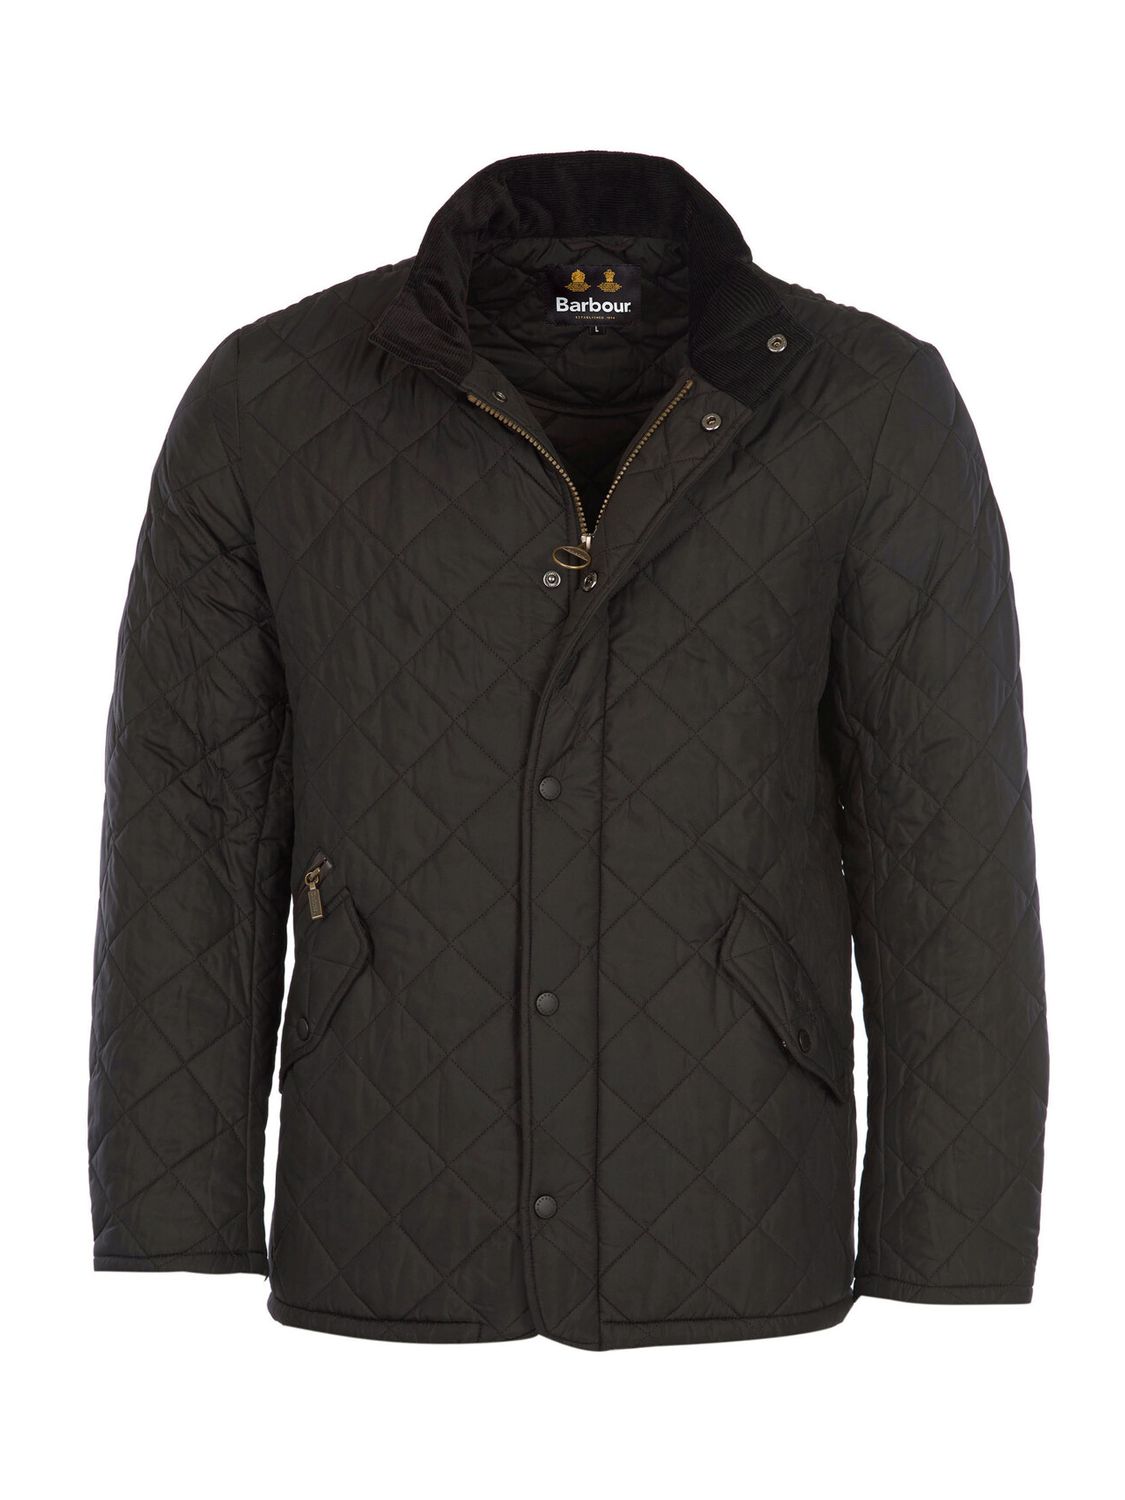 Barbour Chelsea Sportsquilt Water-Resistant Quilted Jacket, Black, S